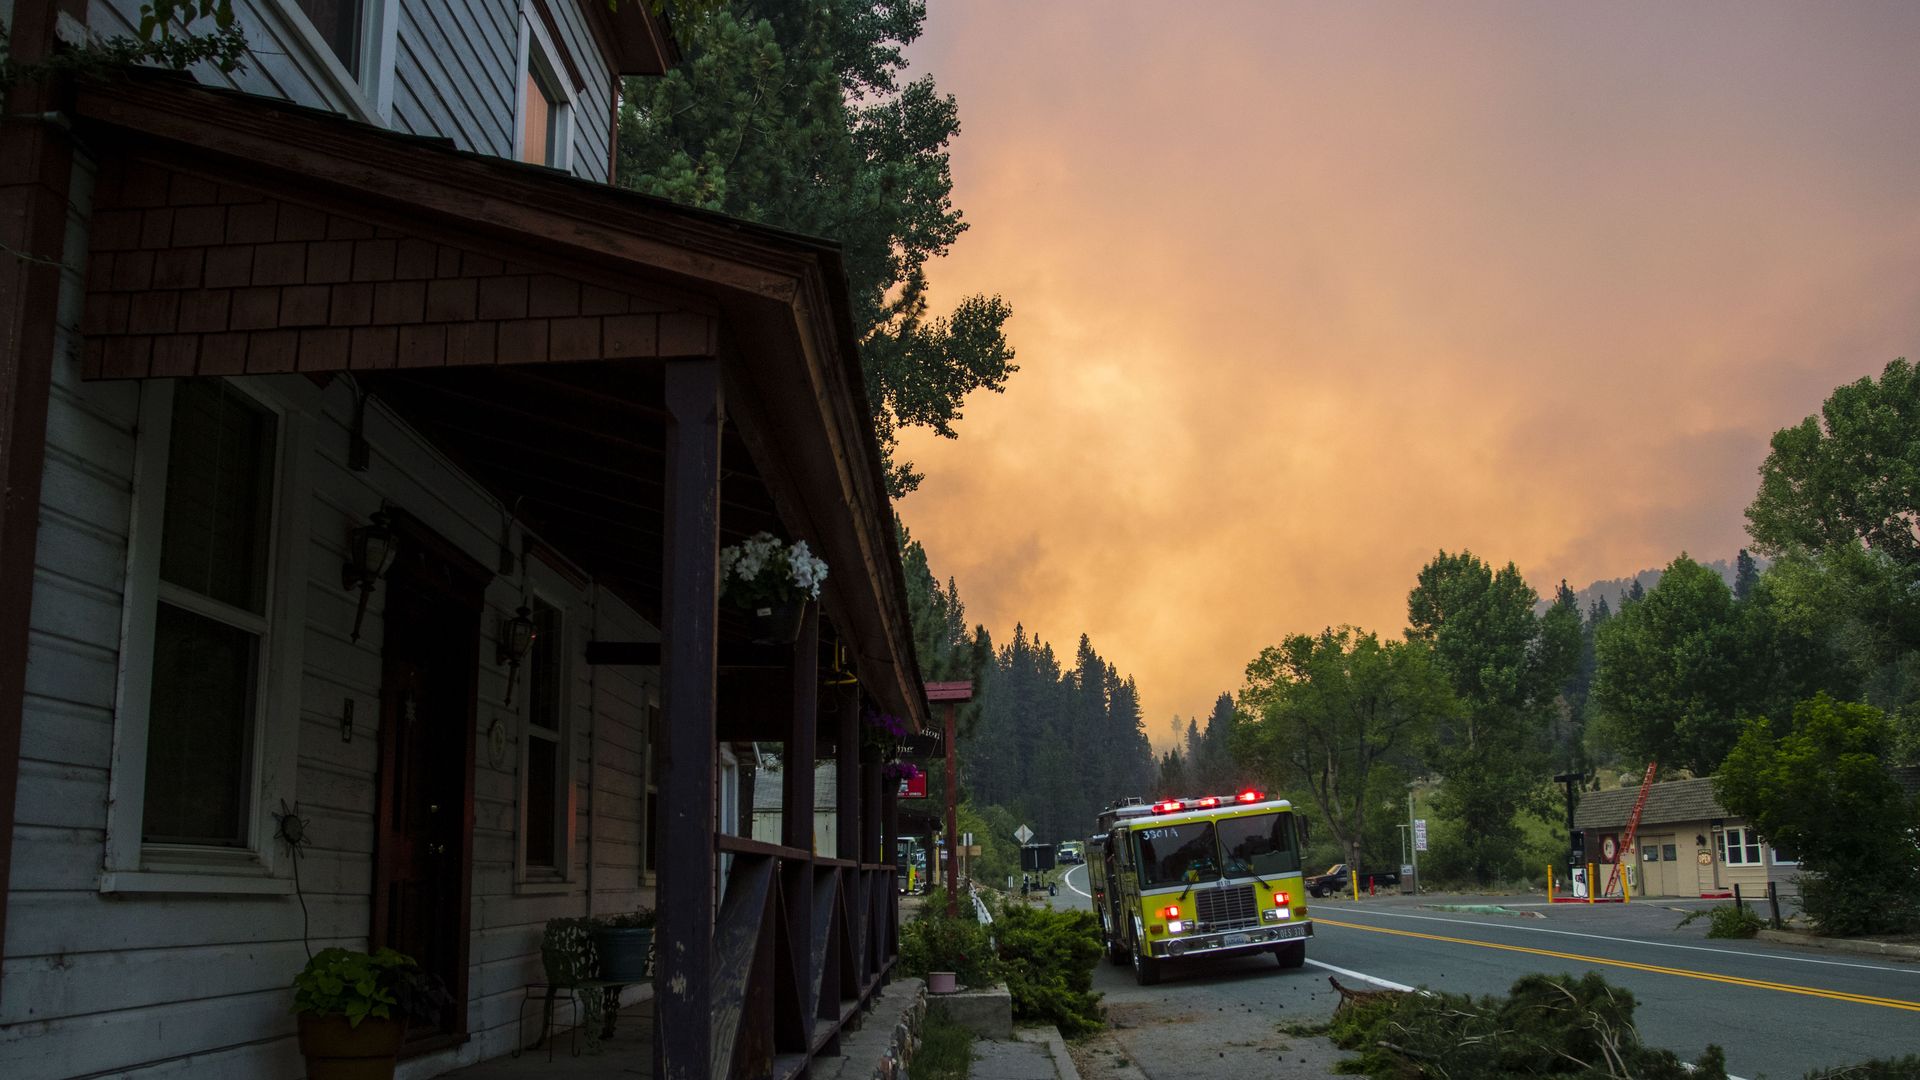 Firefighters are seen working to protect a town as the Tamarack fire continues to burn through more than 21,000 acres in California Saturday.